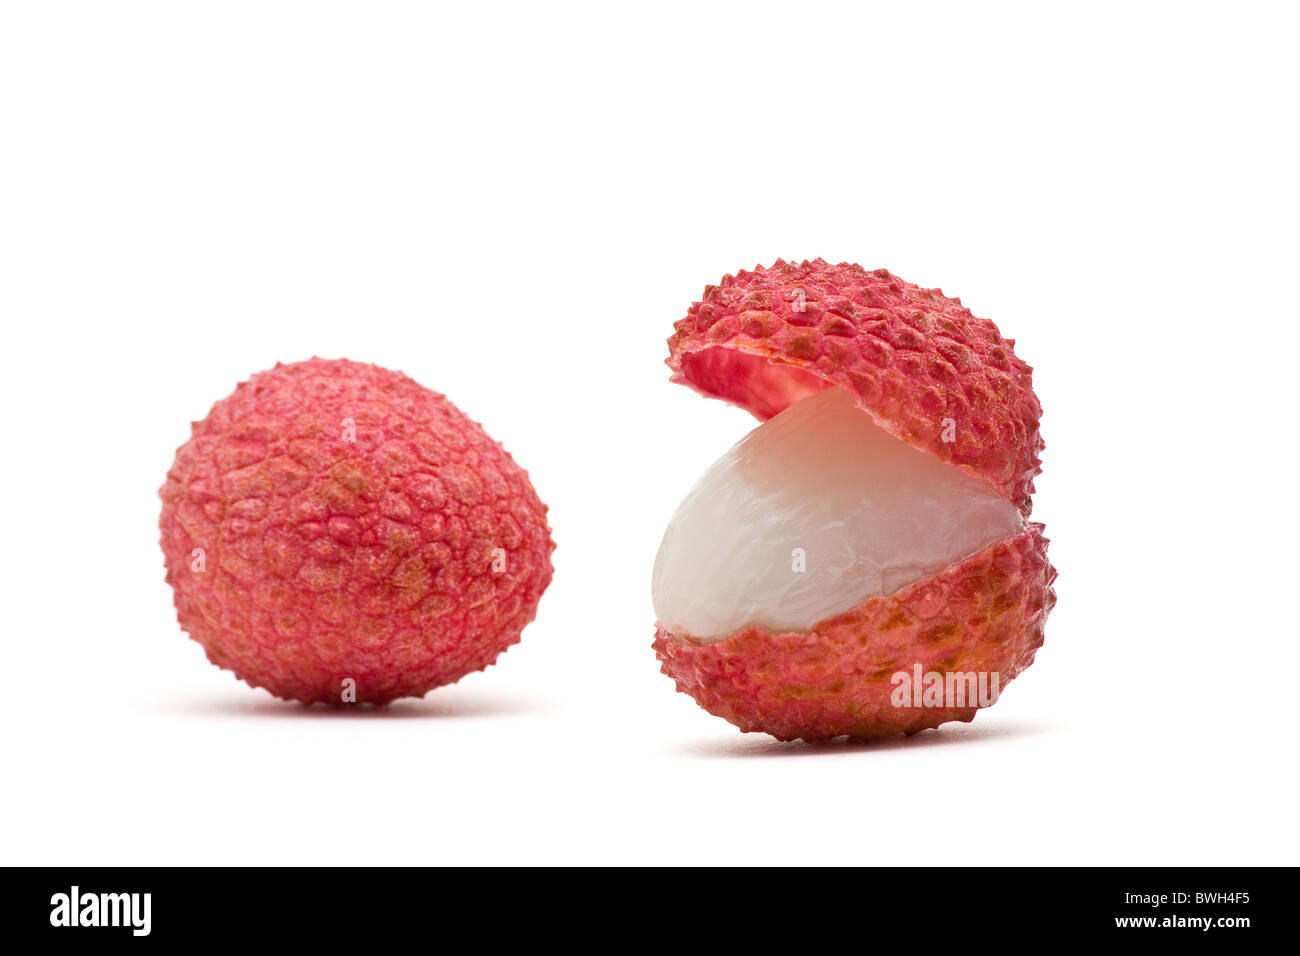 Delicious juicy red lychees over white background Stock Photo